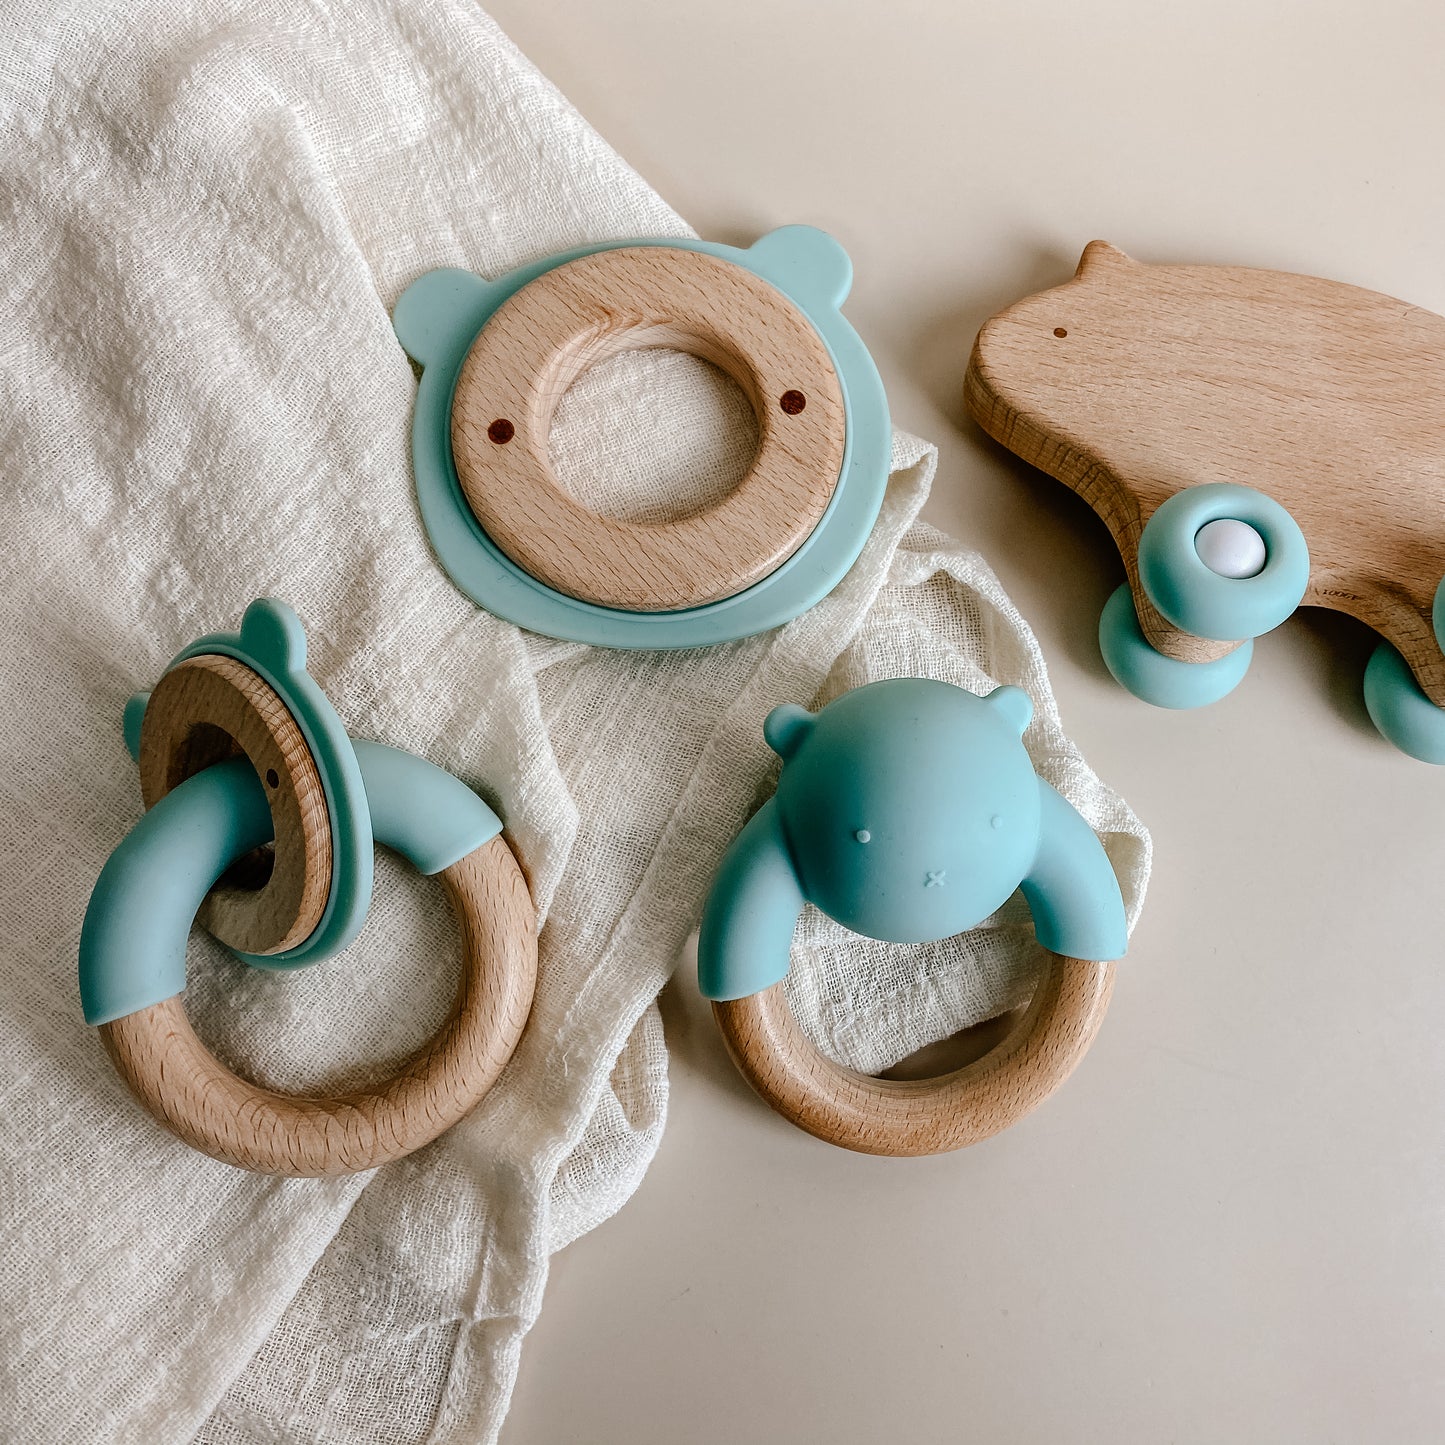 4pc Silicone and Wooden Teether Gift Set